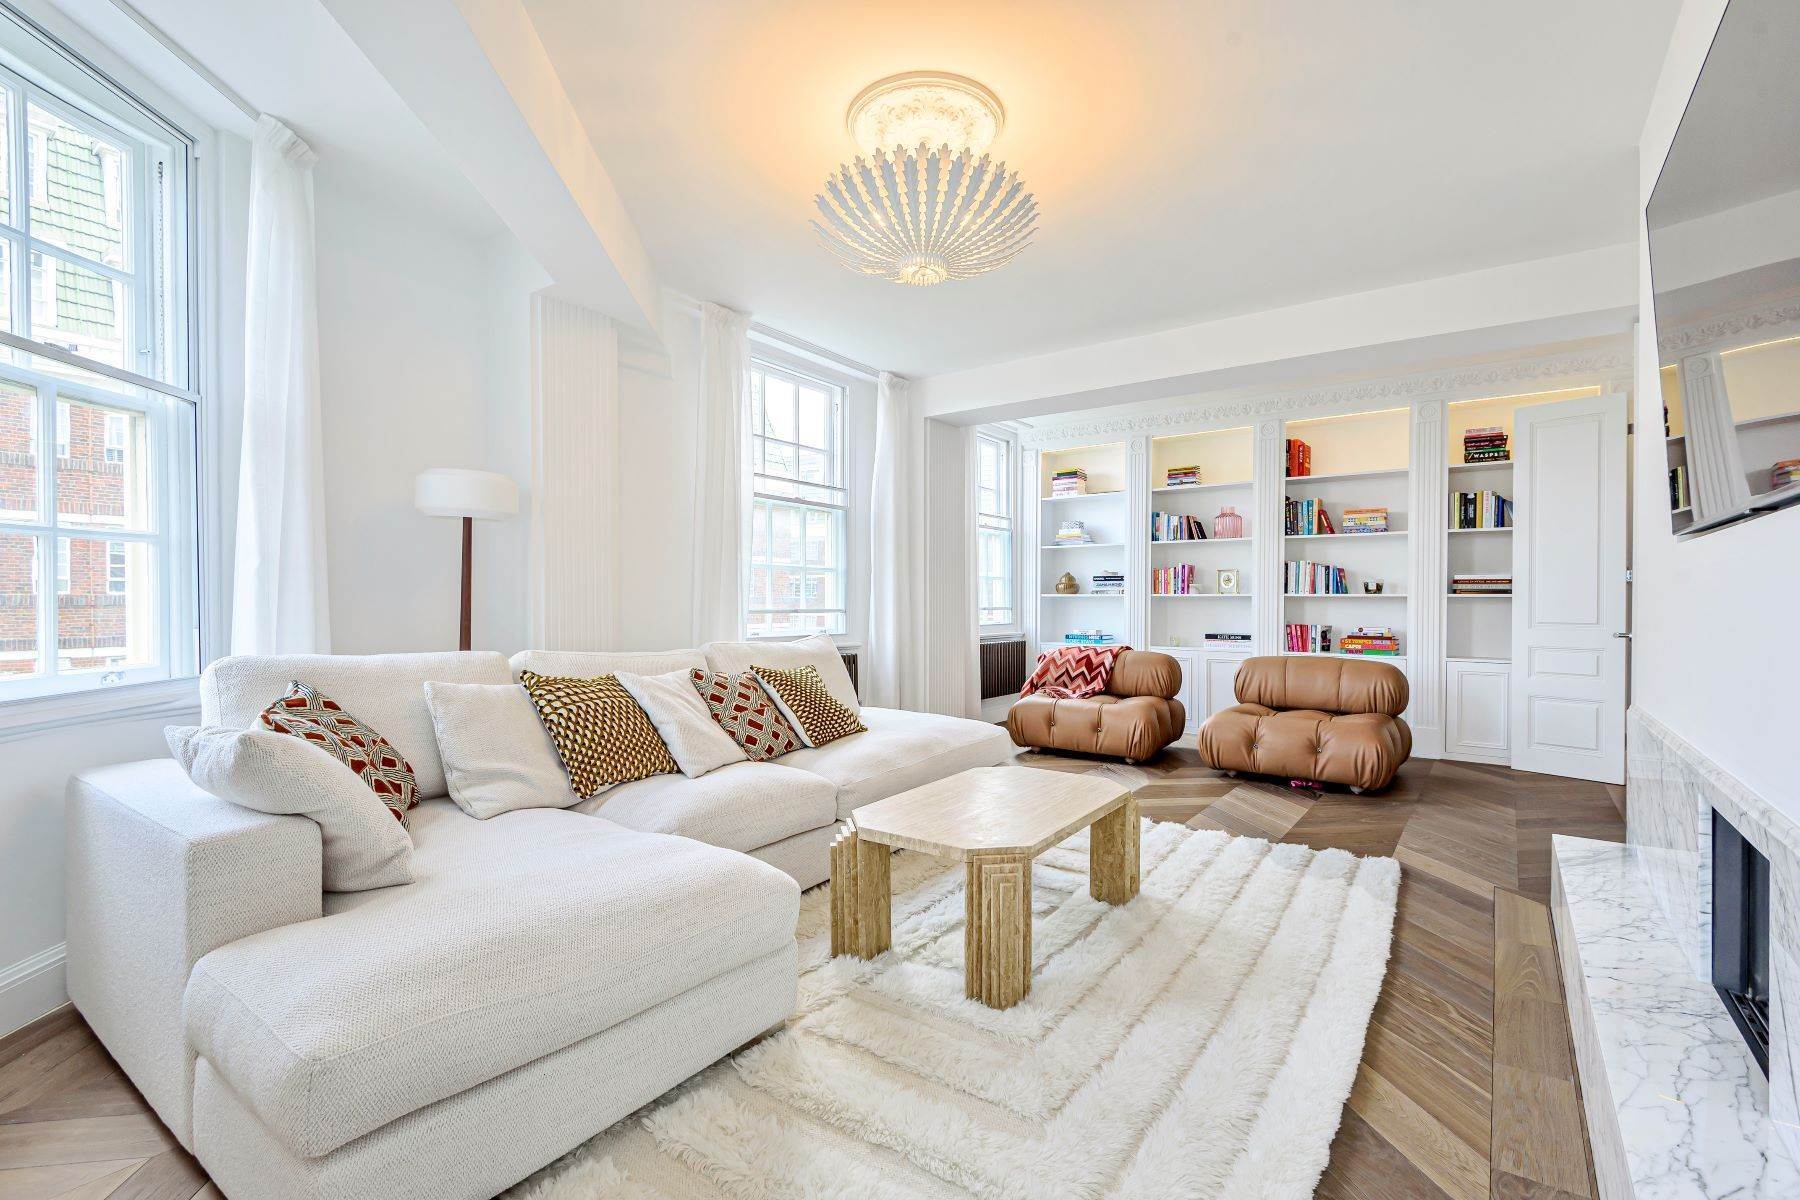 Single Family Homes for Sale at Cranmer Court, Whiteheads Grove London, England SW3 3HW United Kingdom